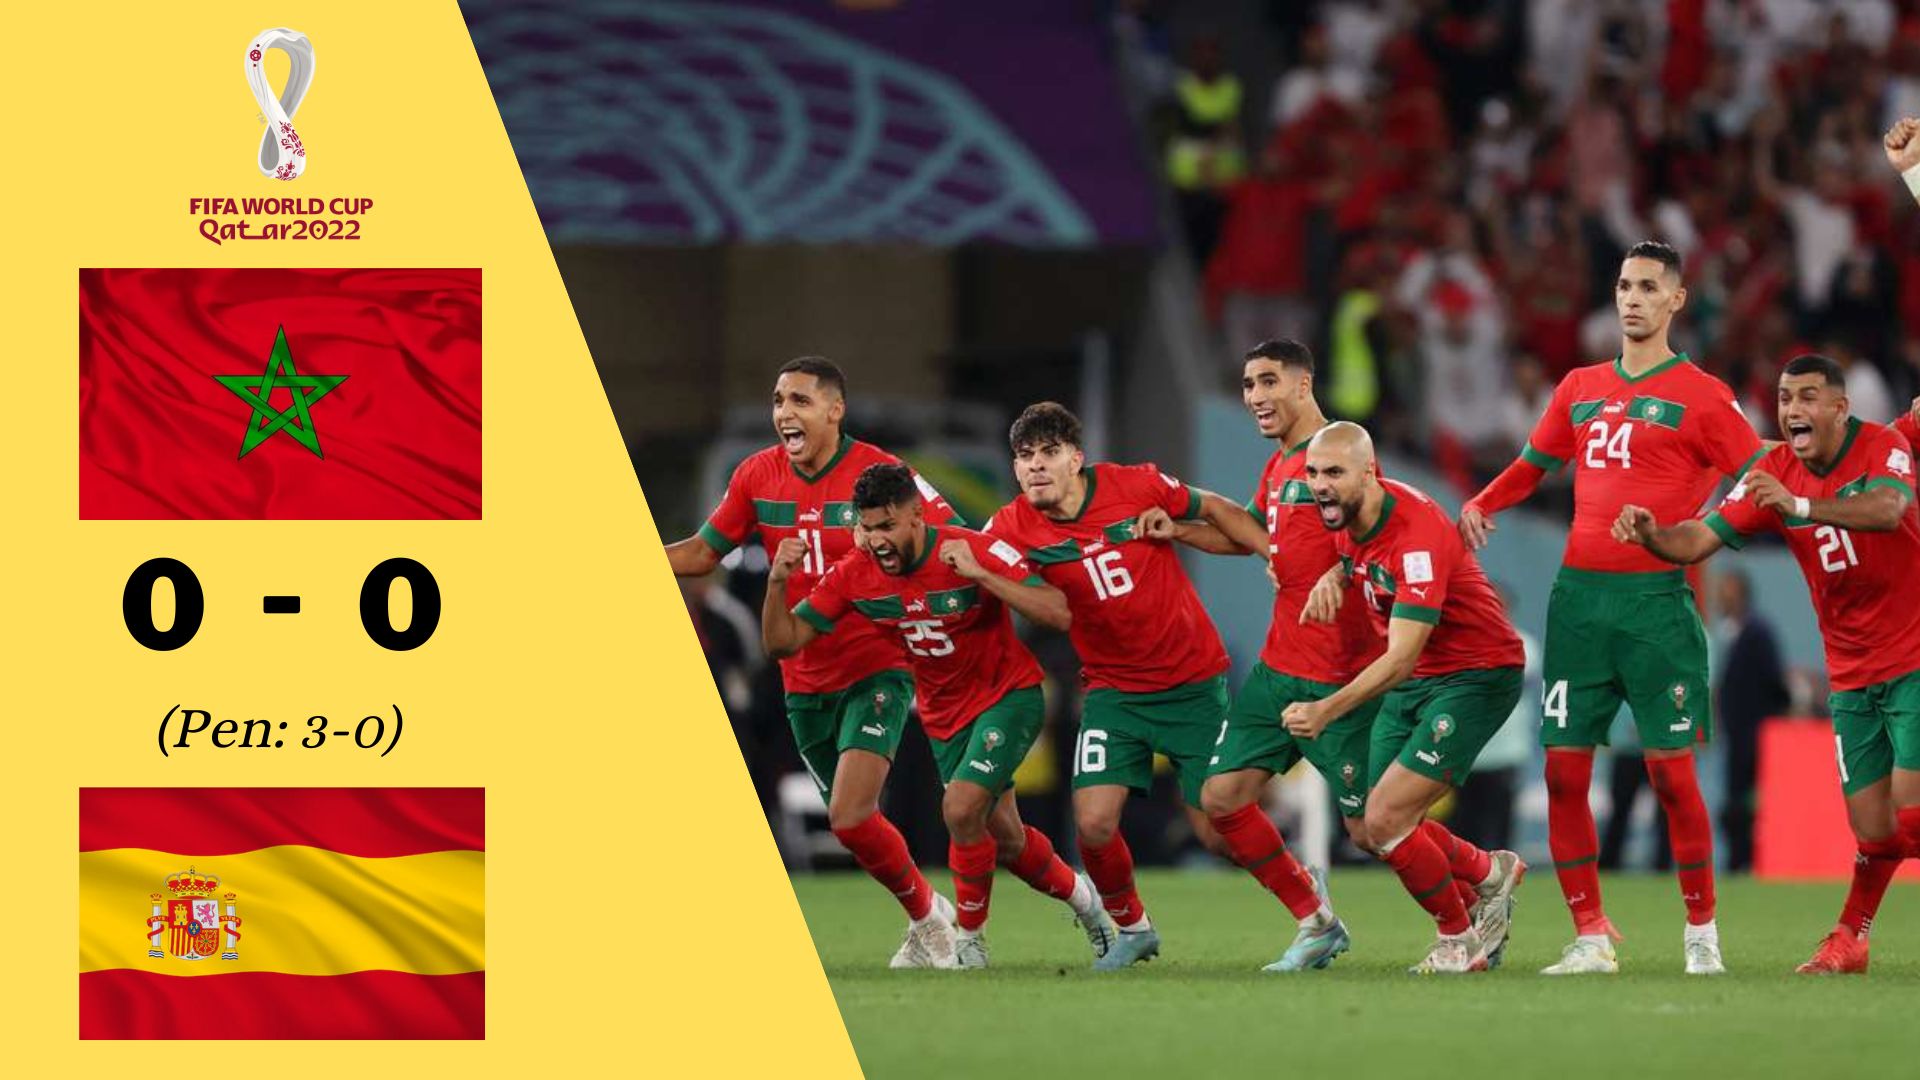 Spain vs. Morocco final score, results (World Cup 2022): Another “earthquake” from the penalty shootout.